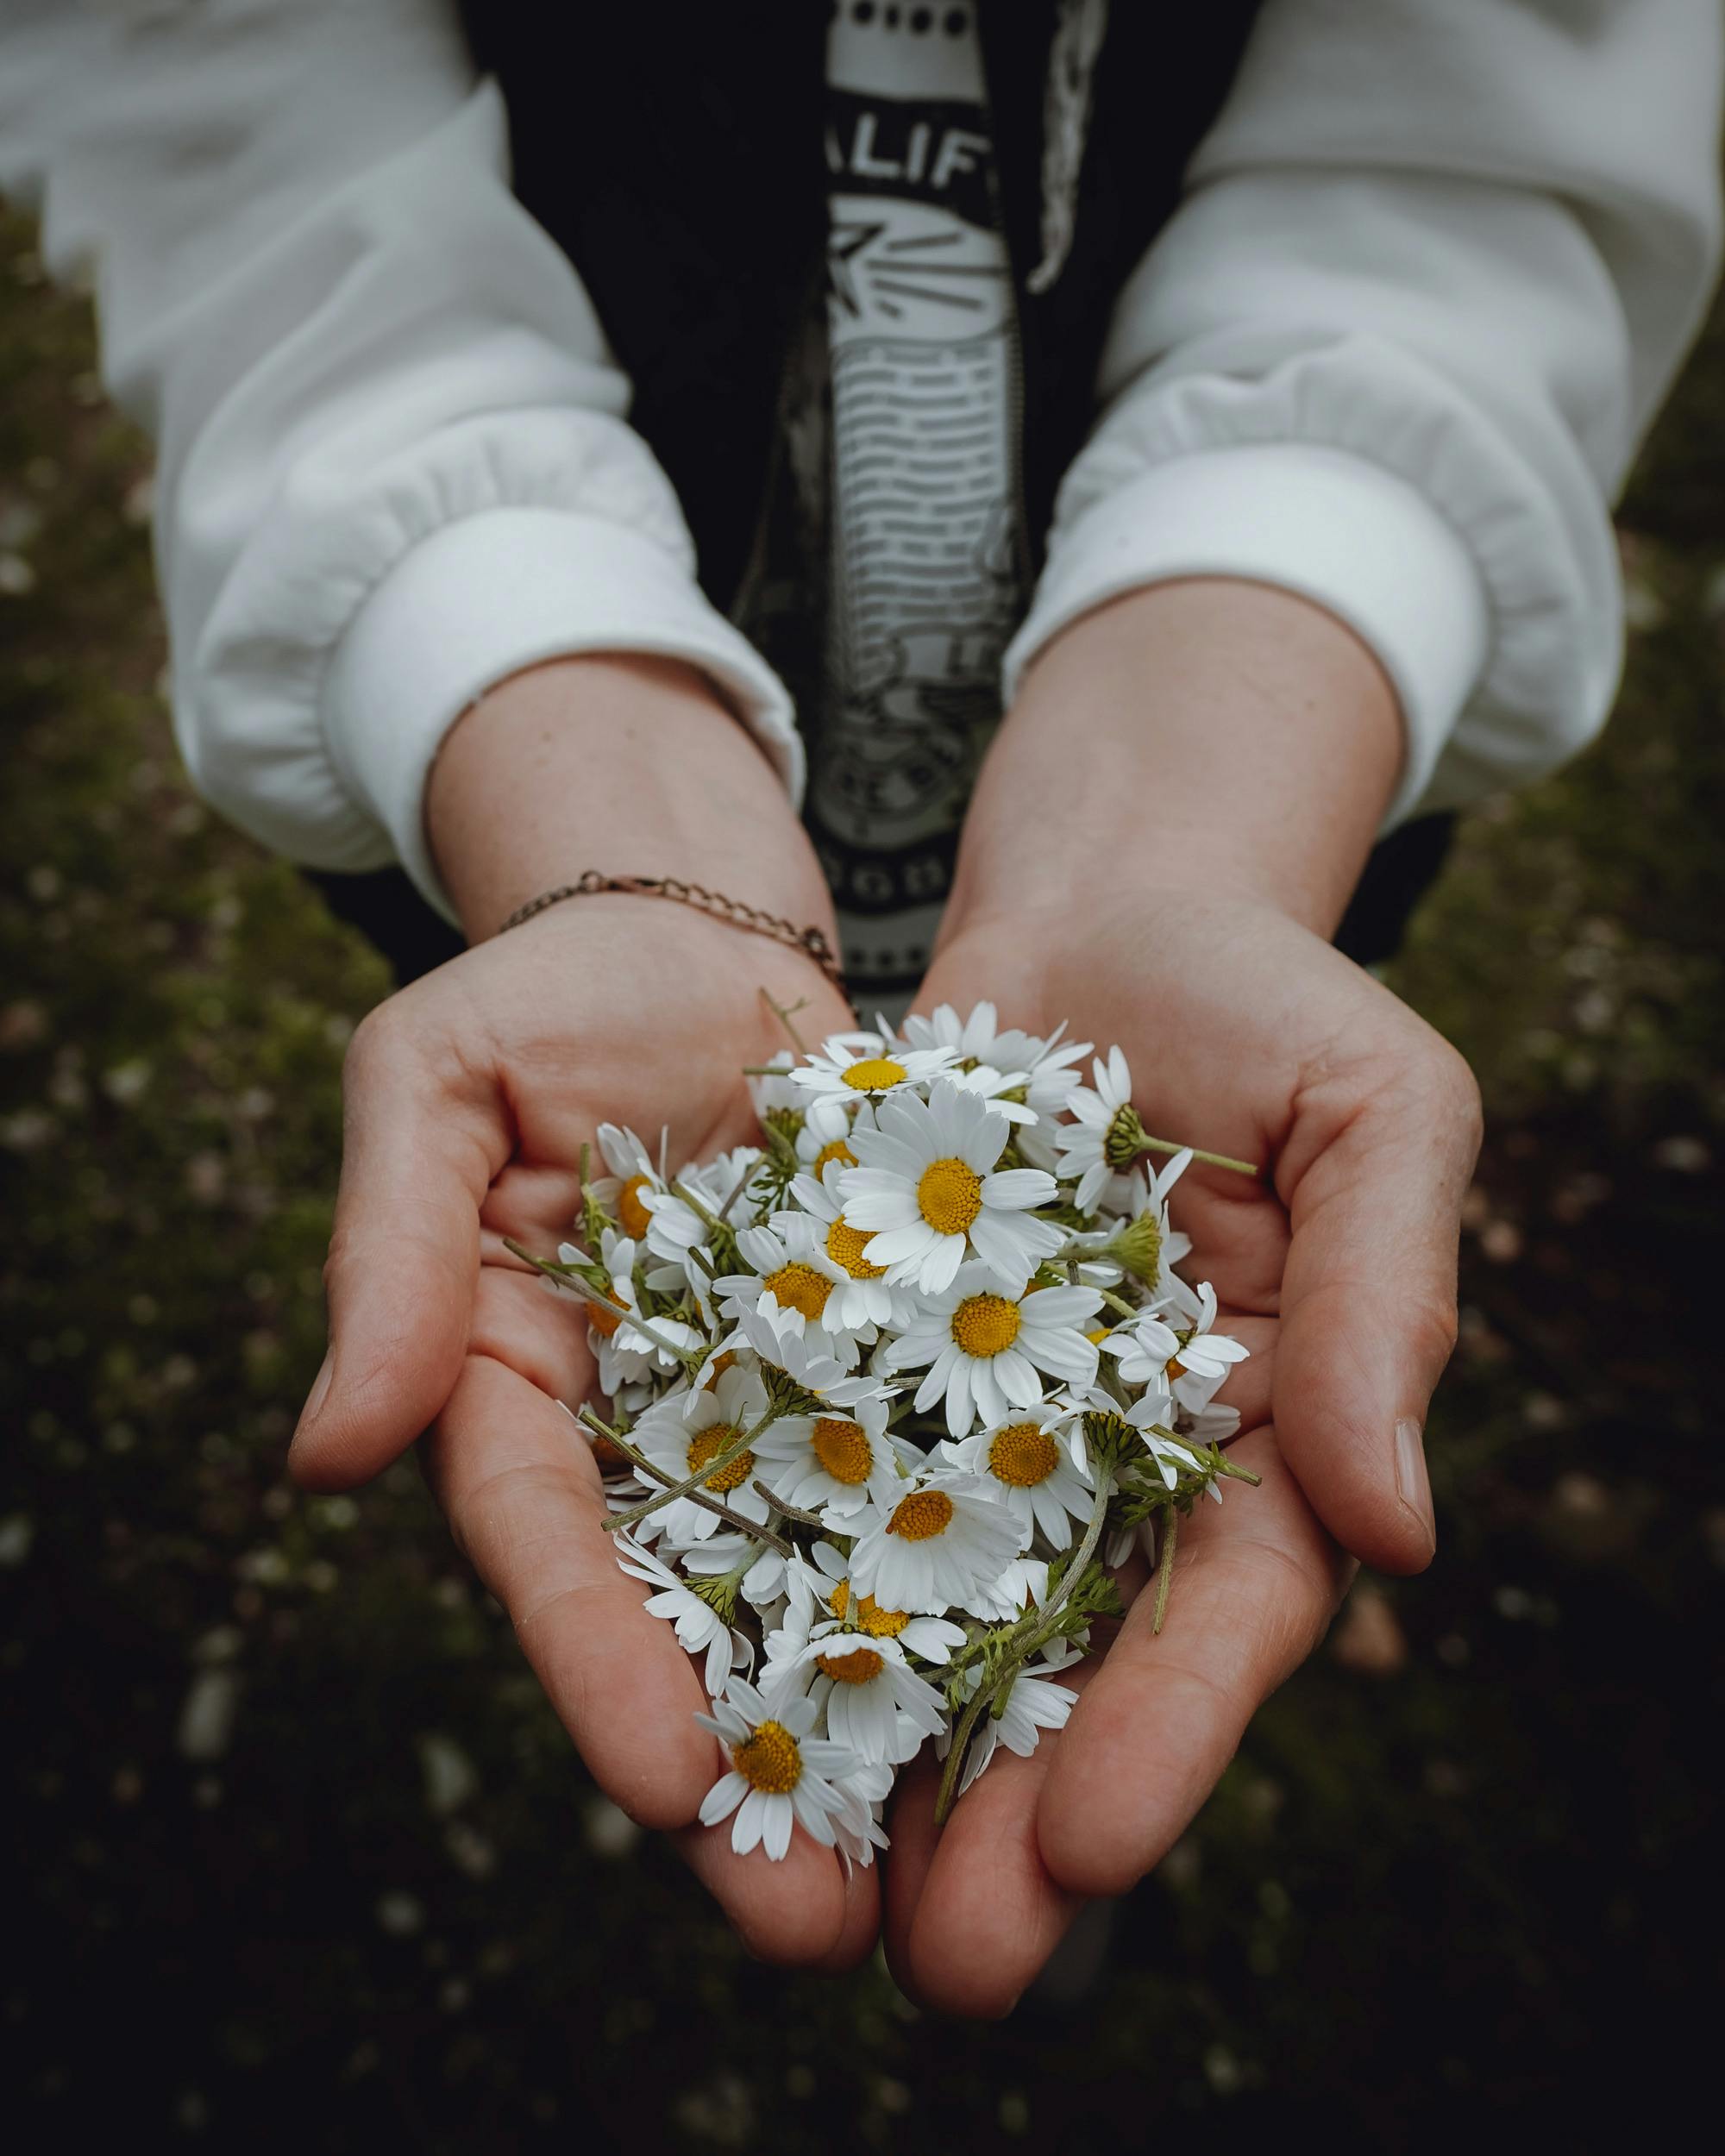 Woman Hand Holding White Flower · Free Stock Photo